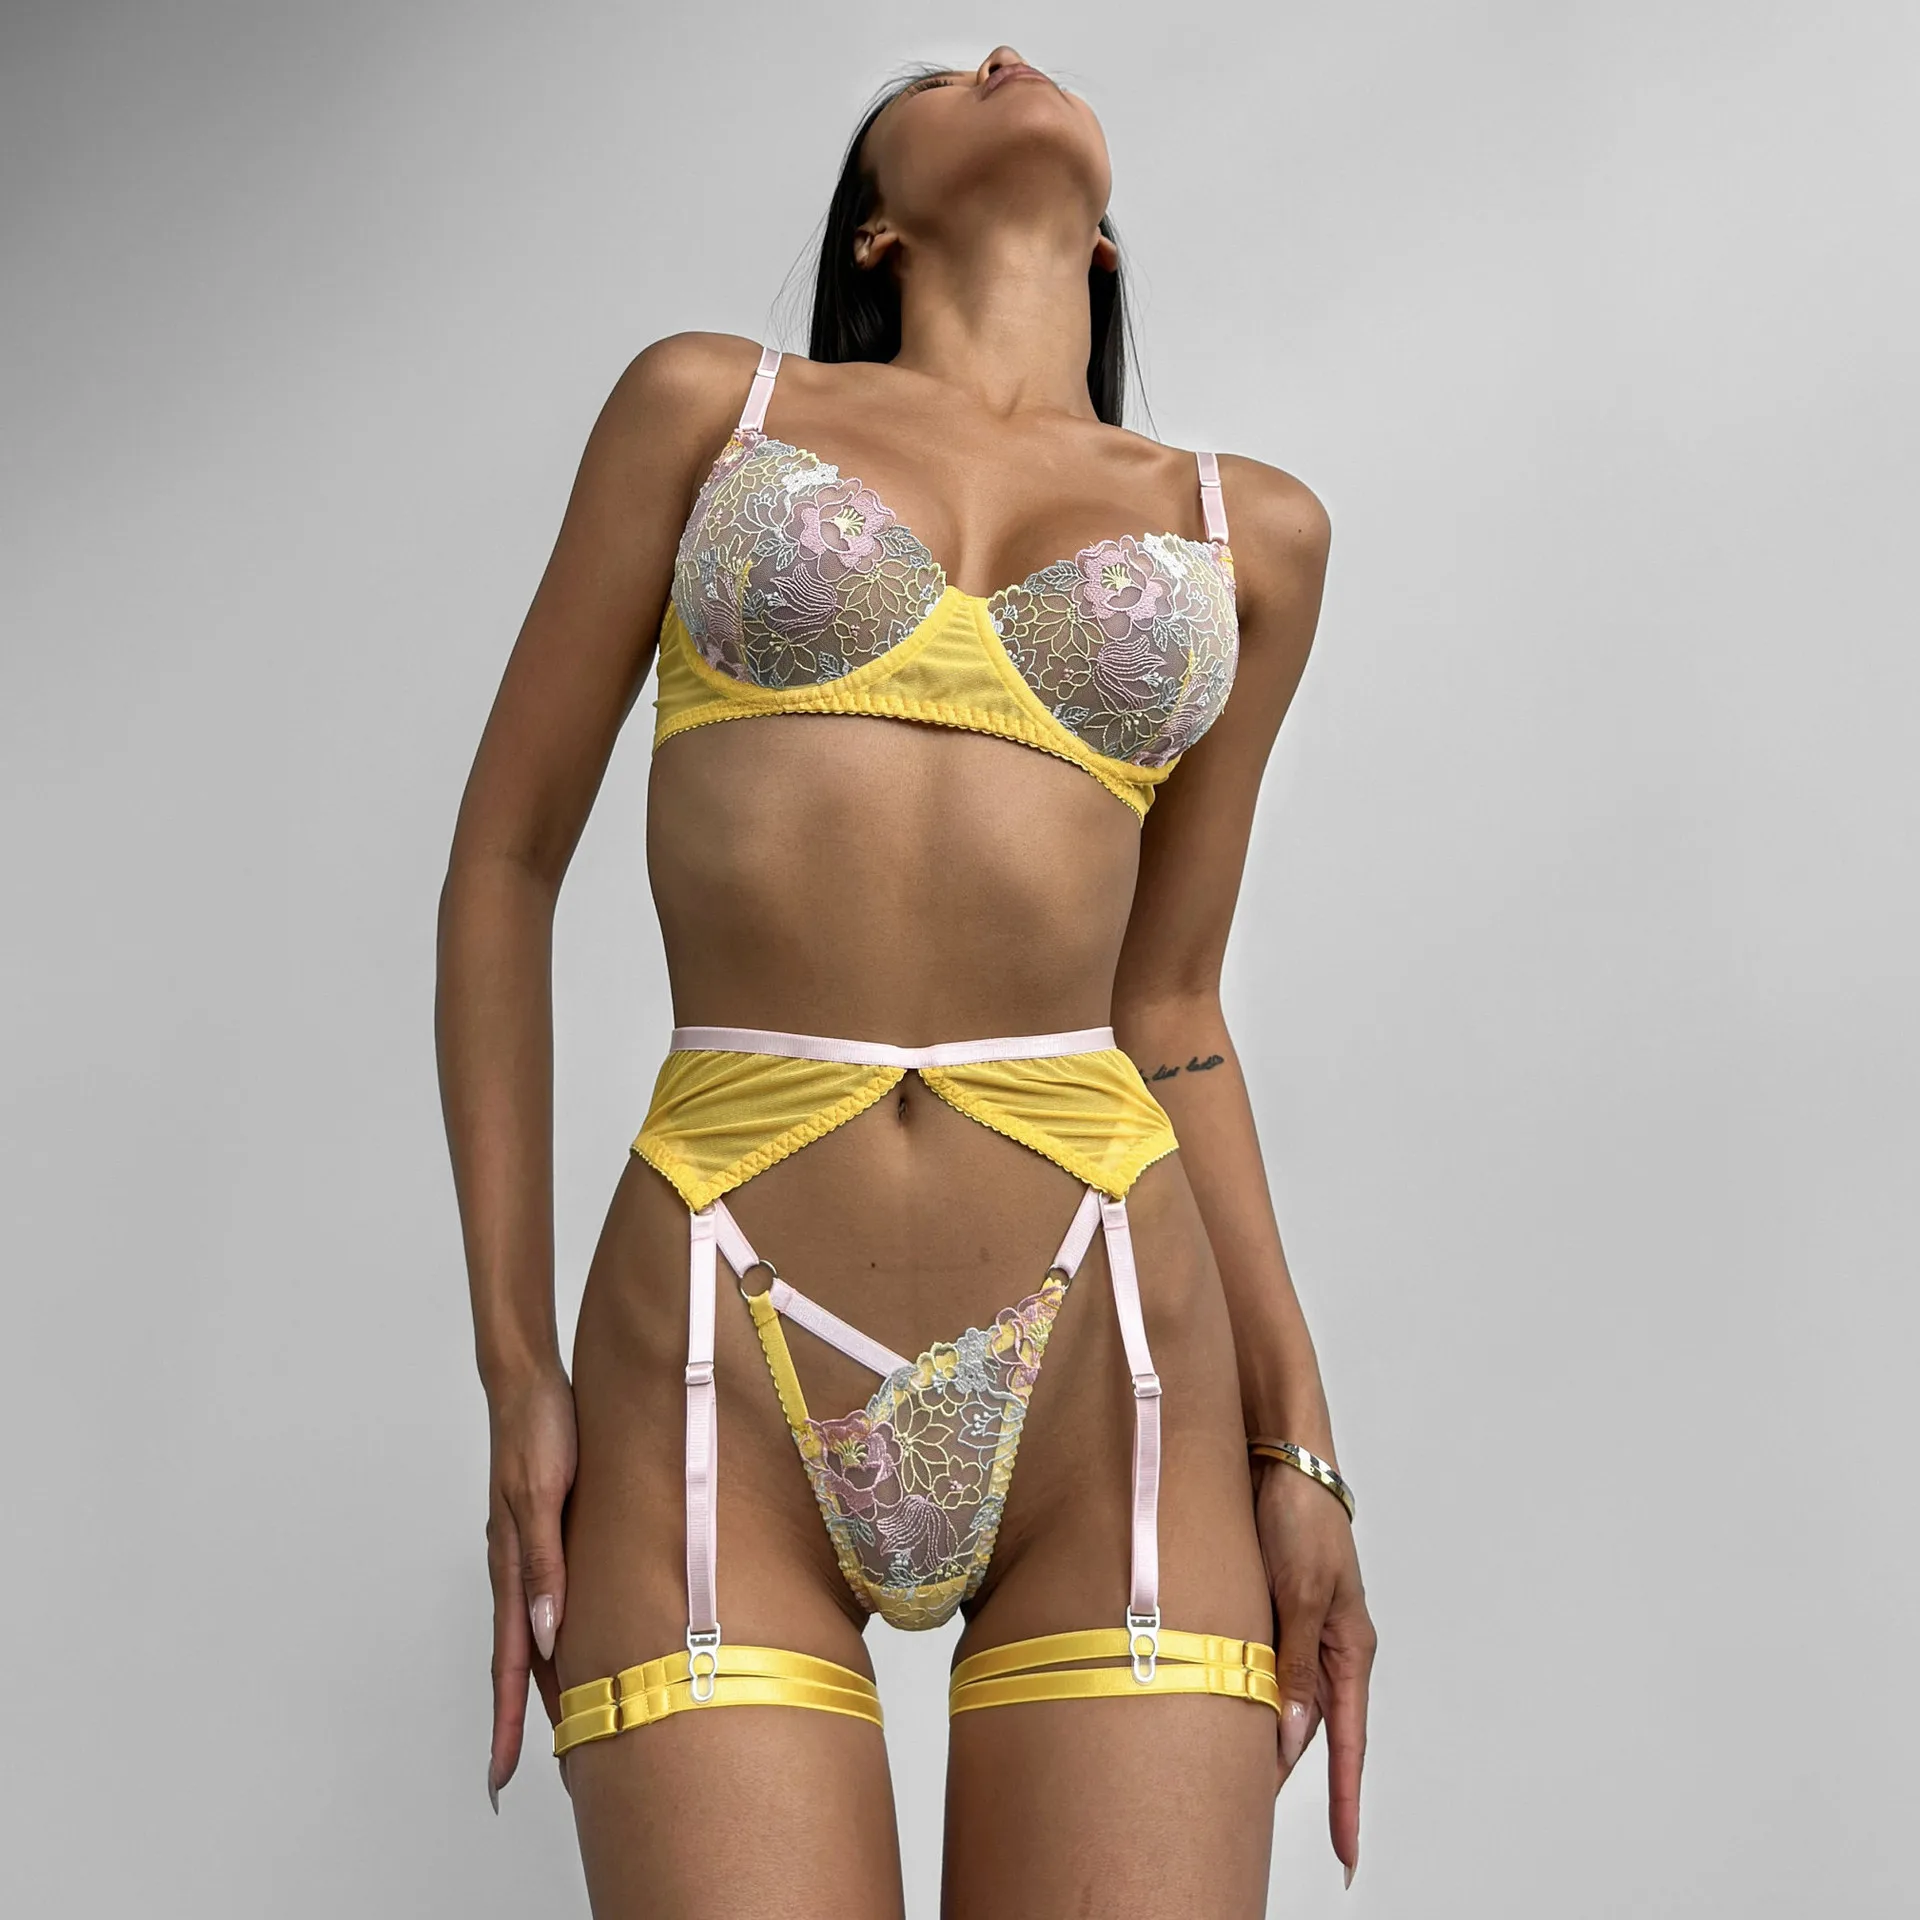 

SexeLakas Sensual Lingerie Lace Floral Embroidery Transparent Underwear Fancy Push Up Bra and Panty See Through Yellow Intimate